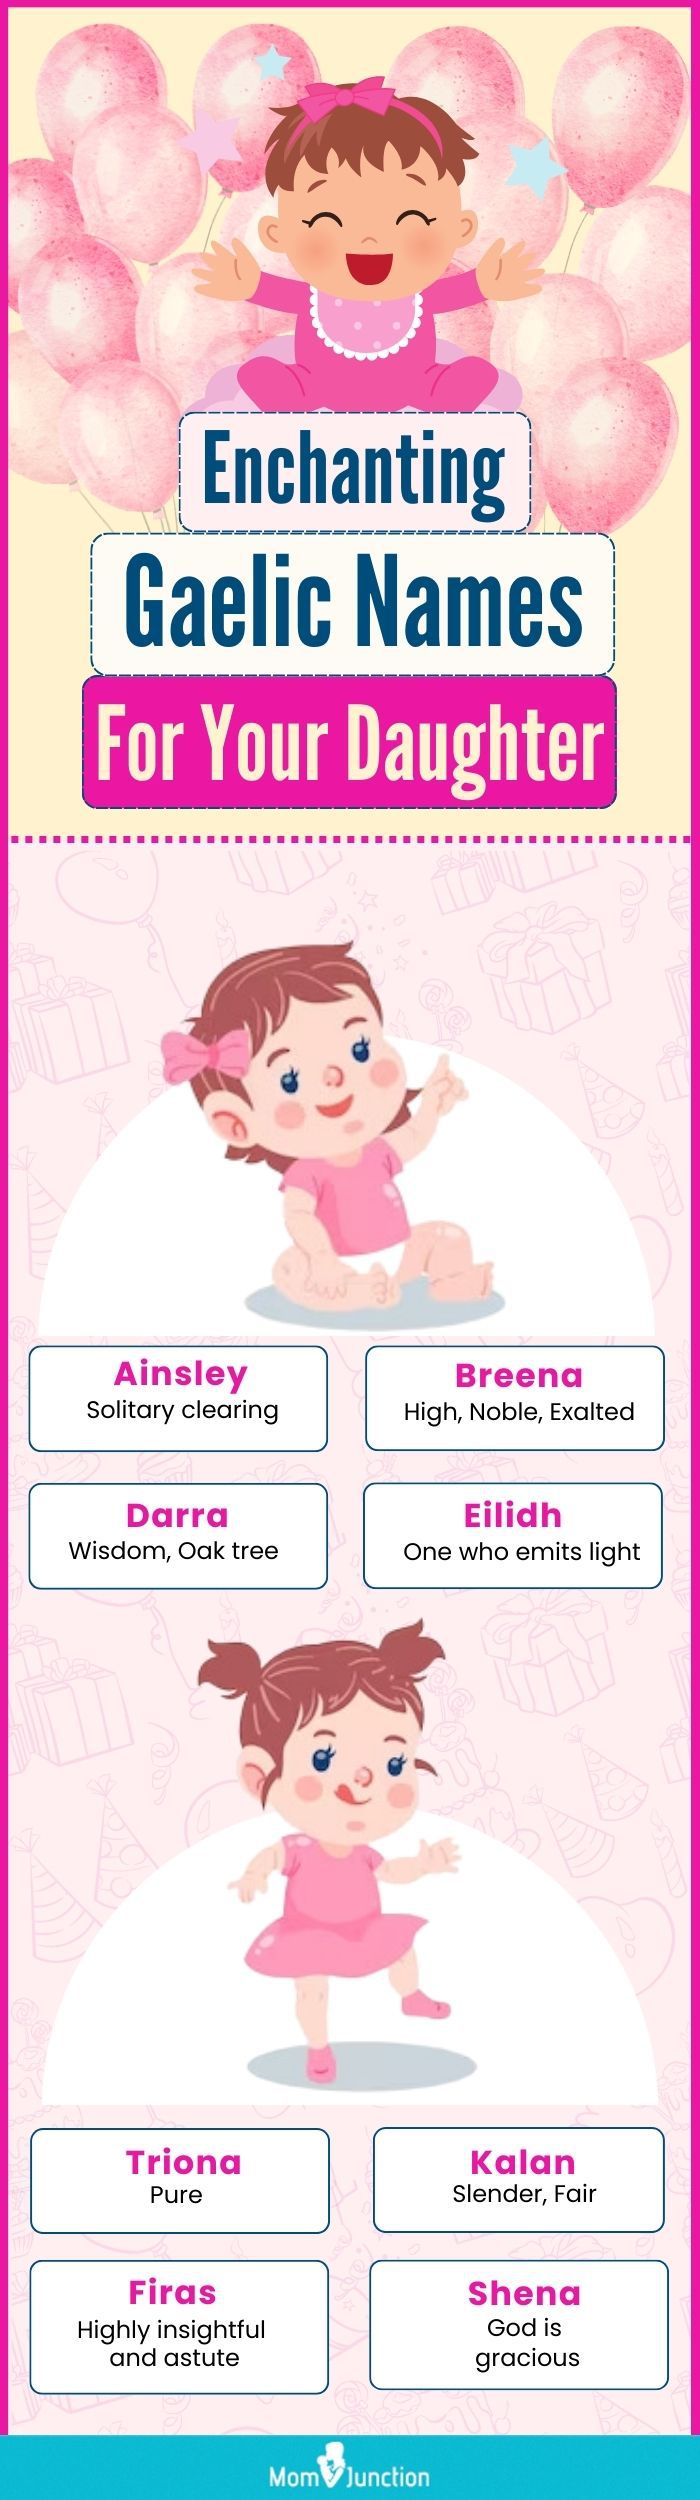 enchanting gaelic names for your daughter (infographic)